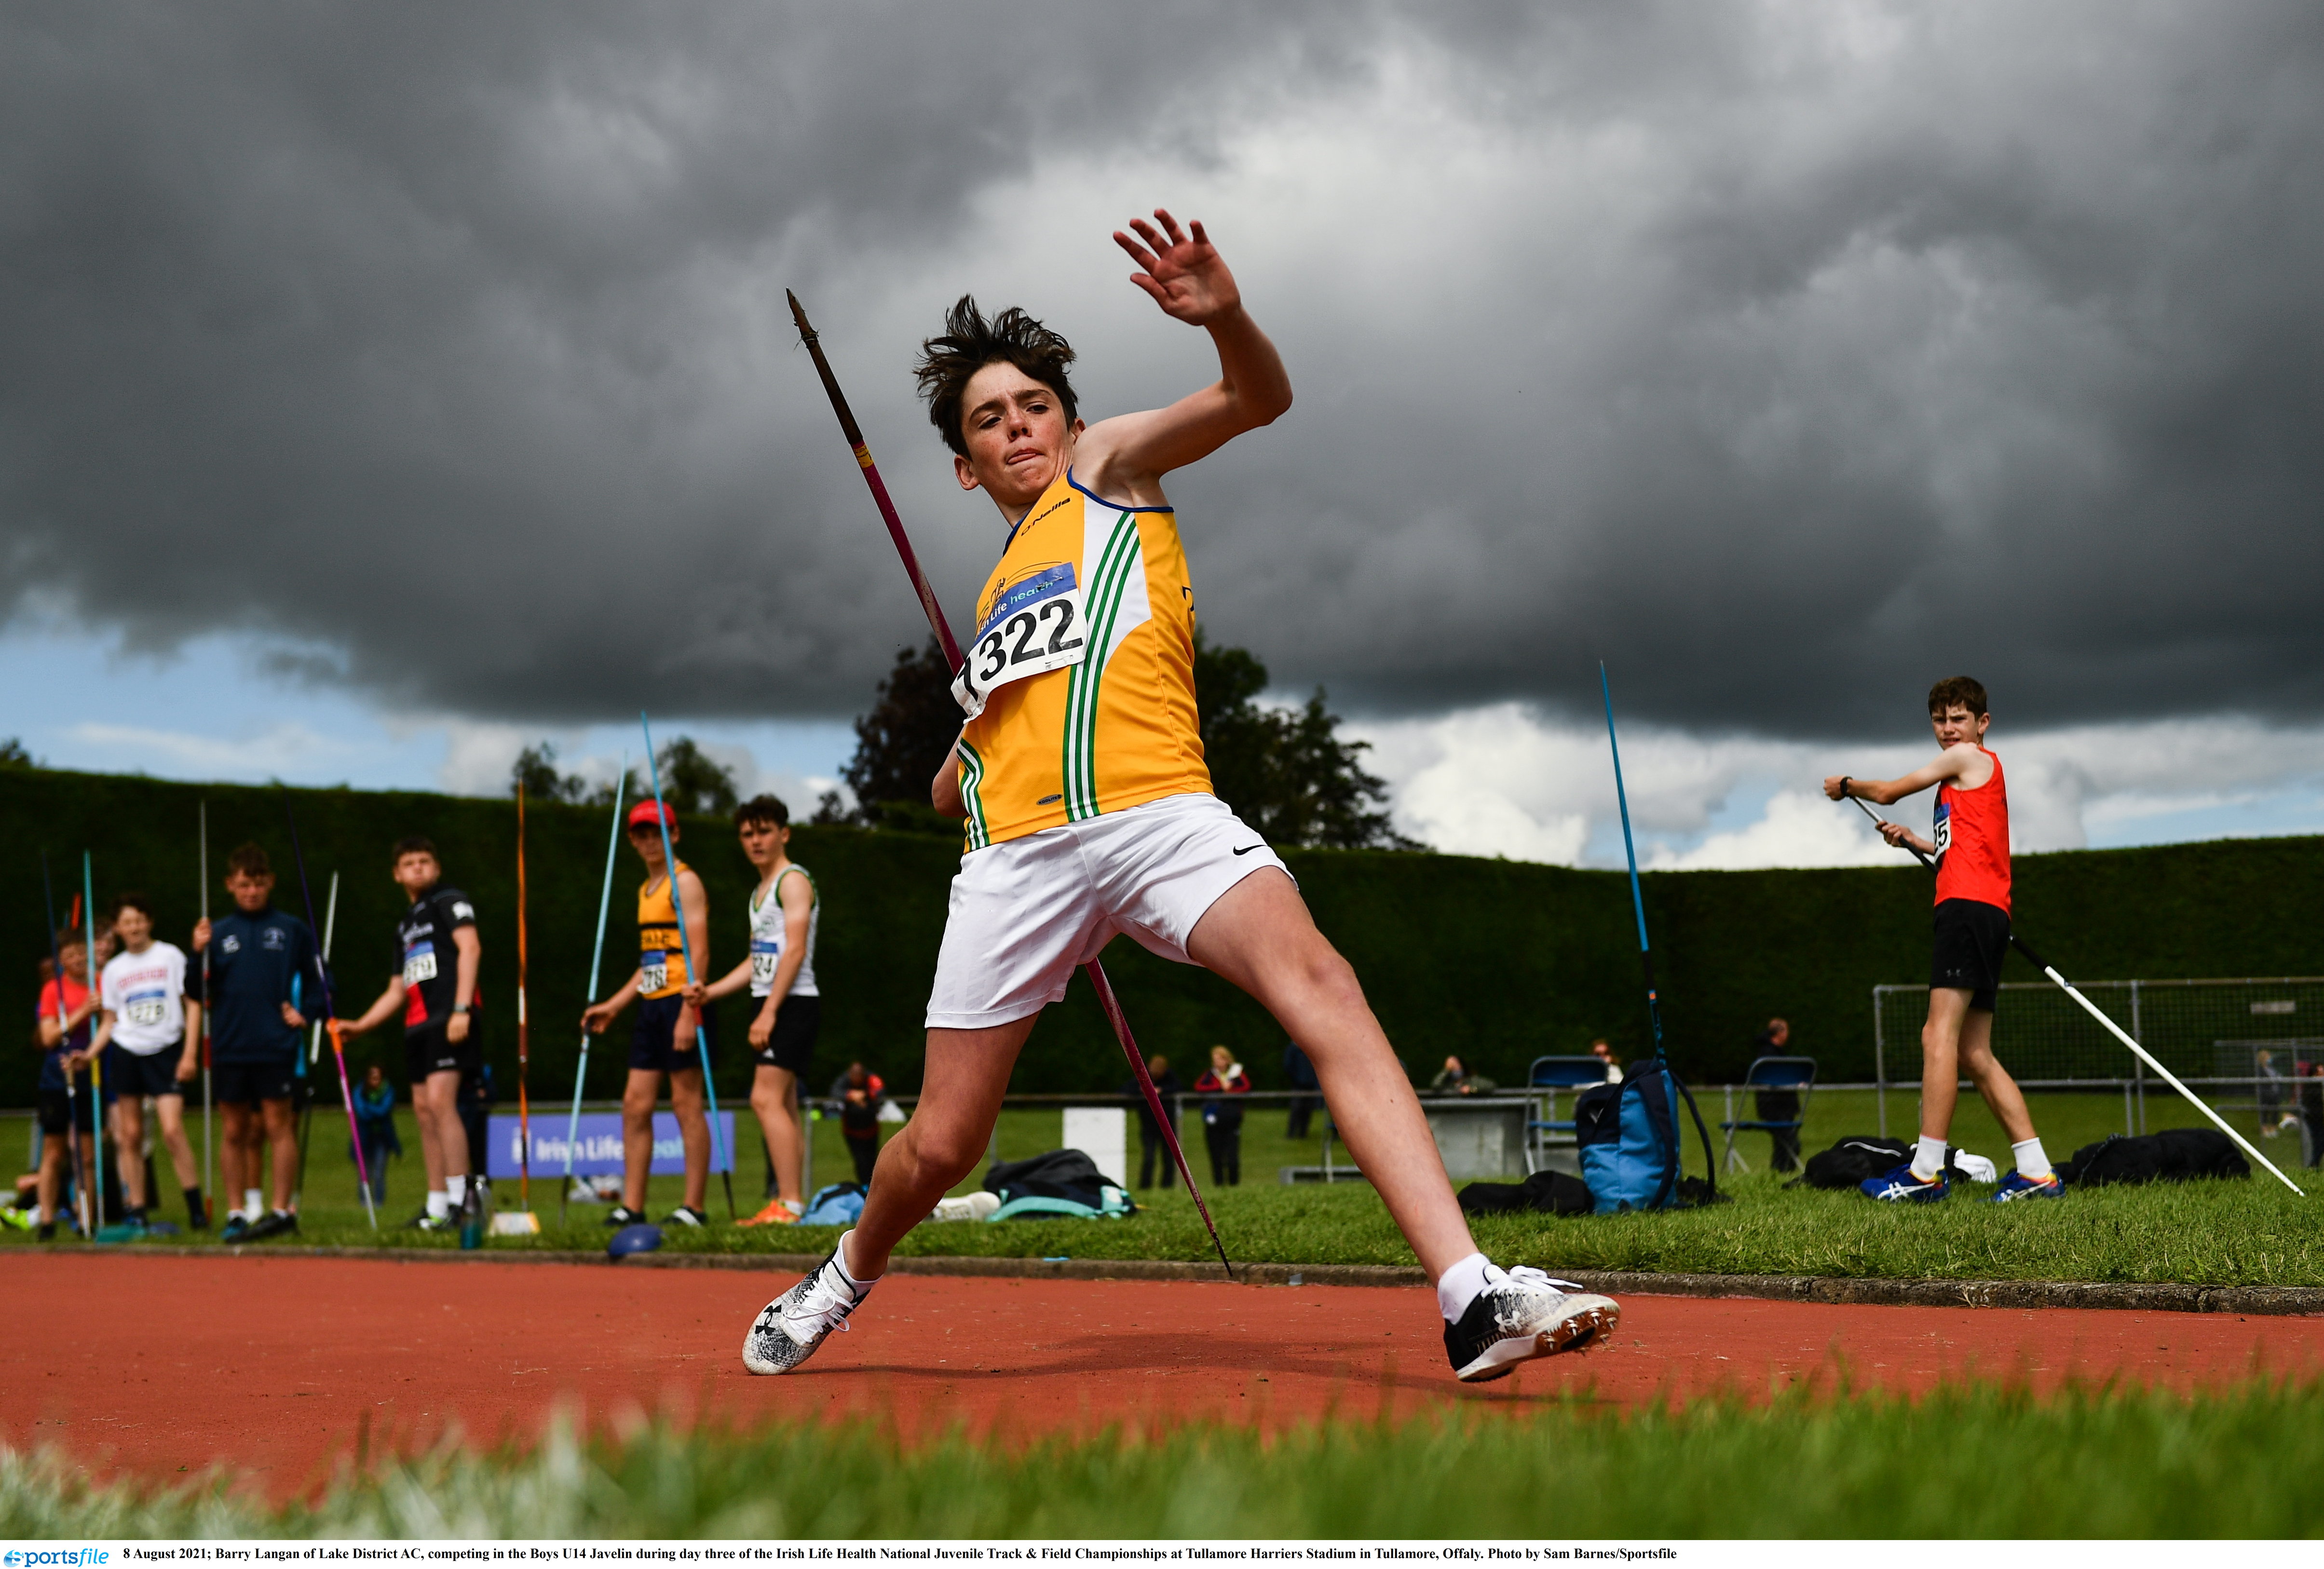 Event Information: Irish Life Health Juvenile Track and Field Championships